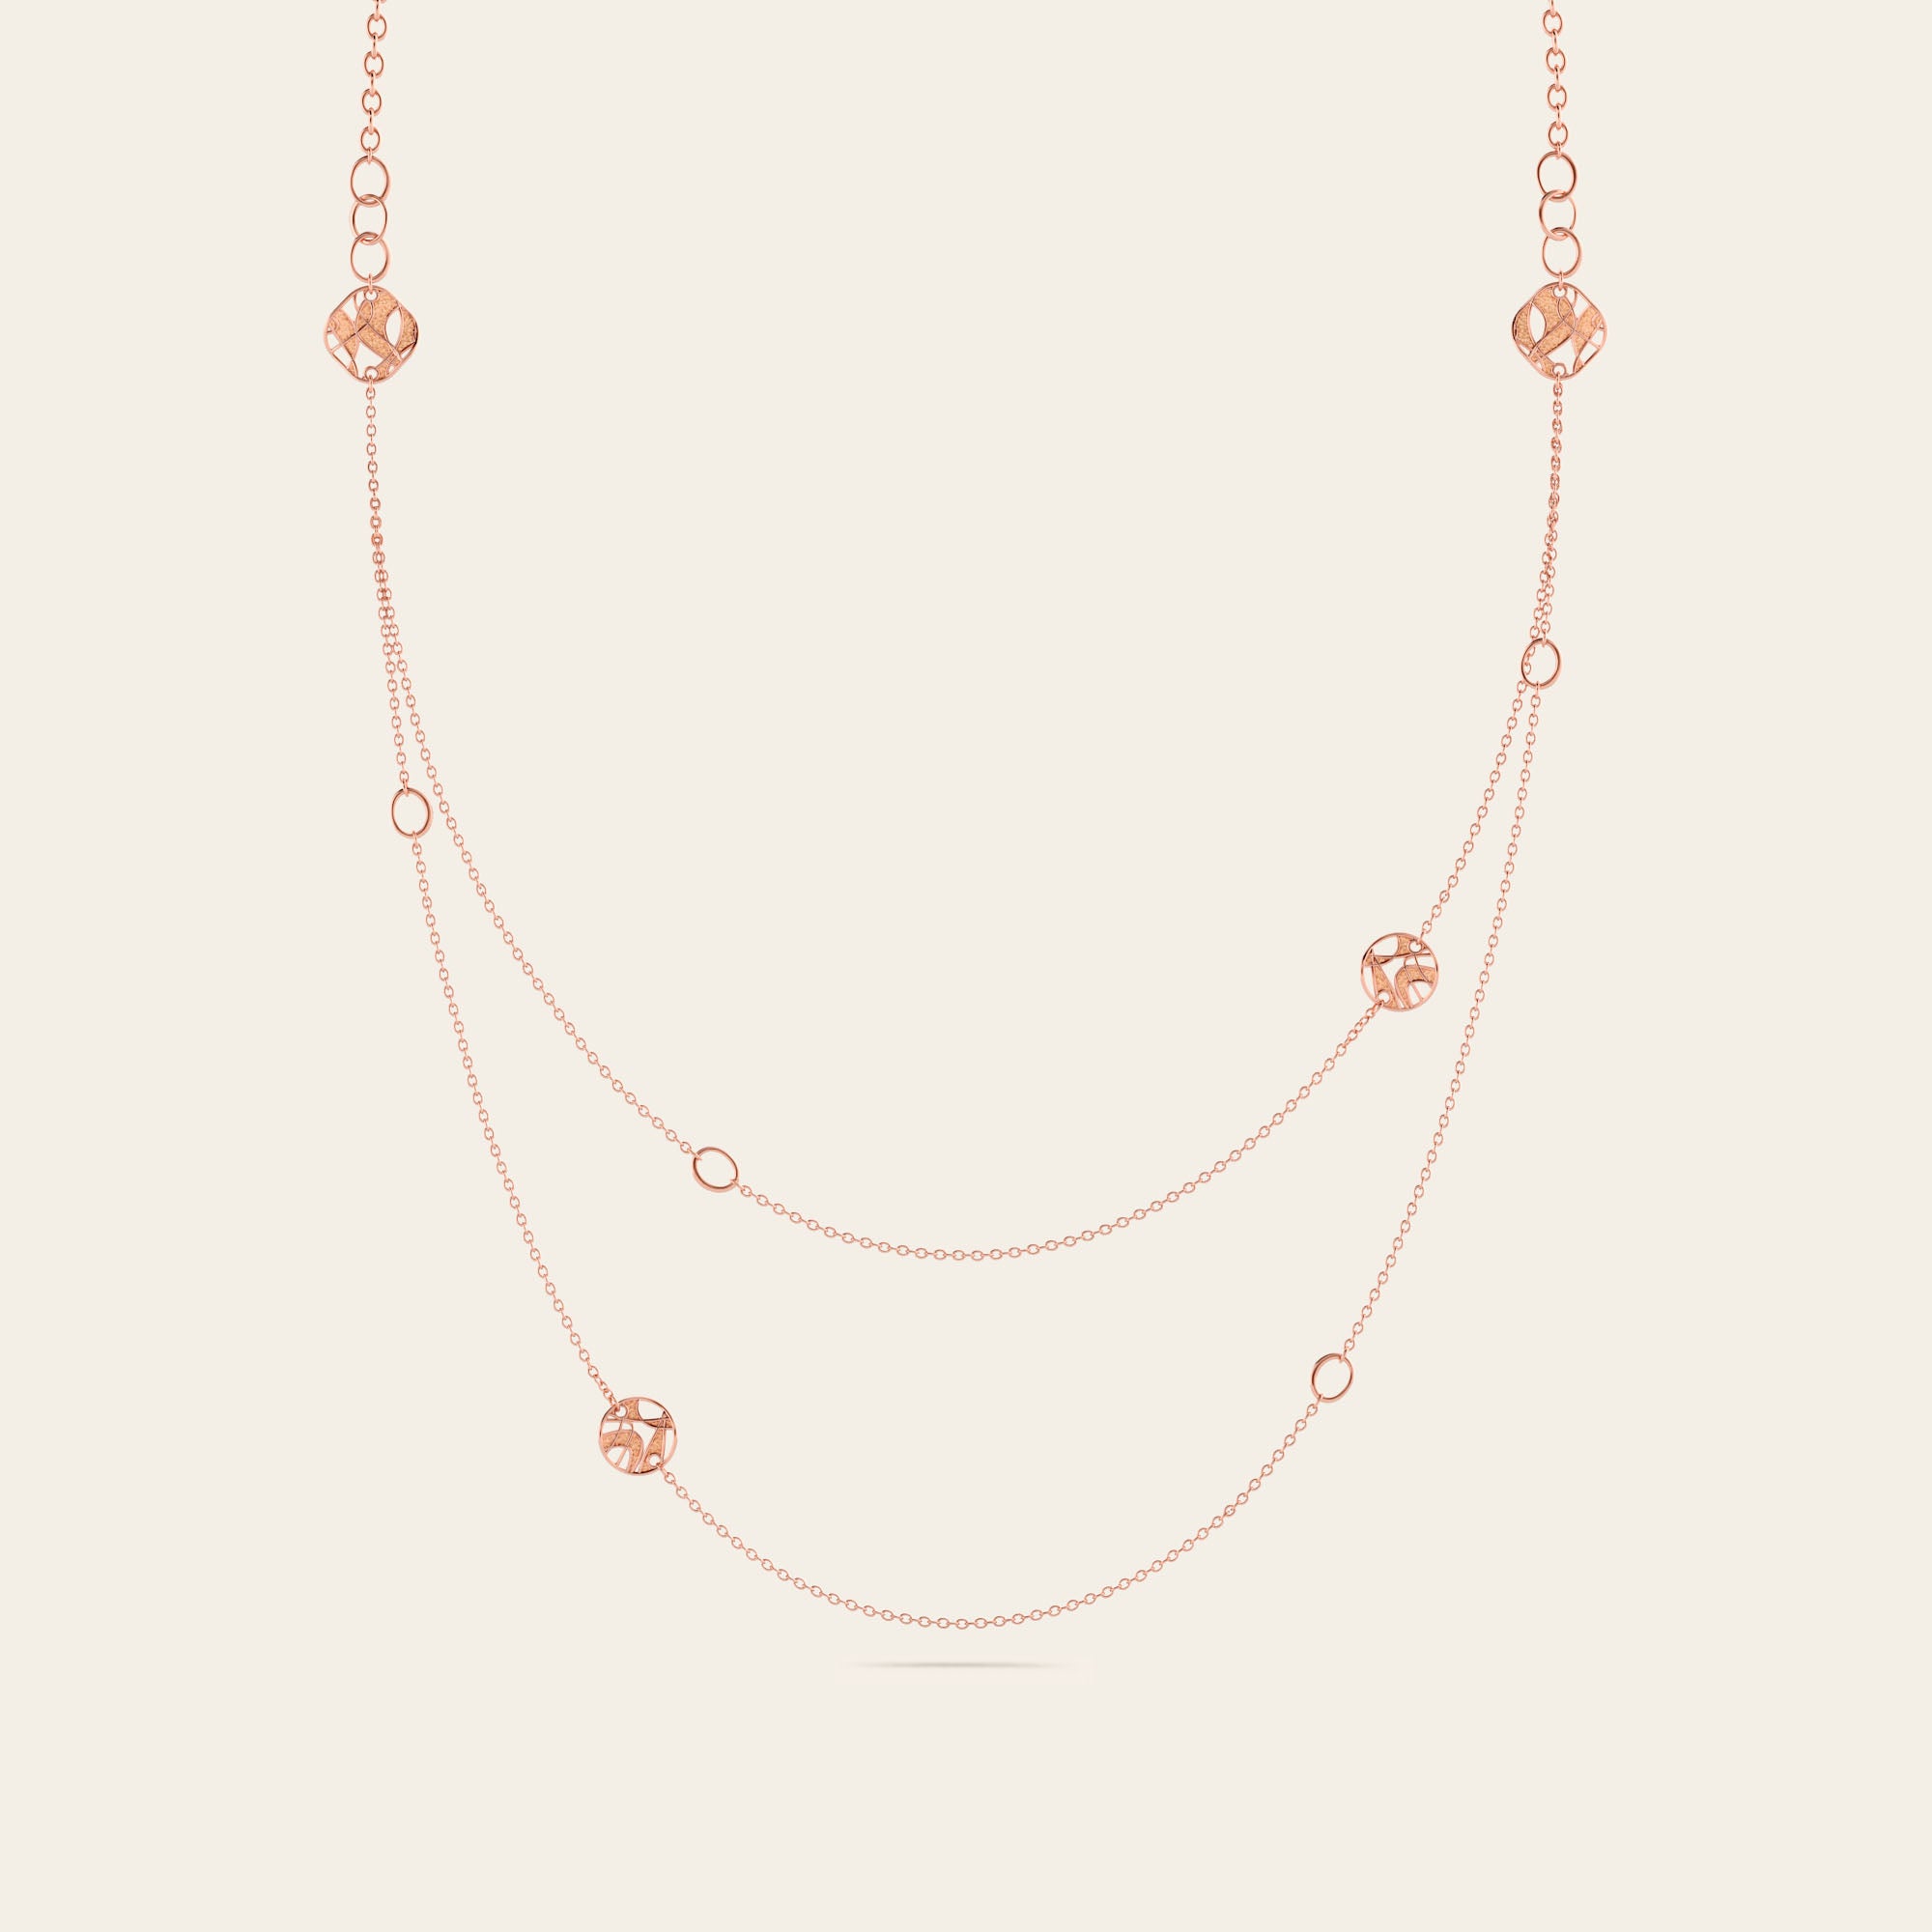 Cascade Double Chain Necklace in 18k Rose Gold